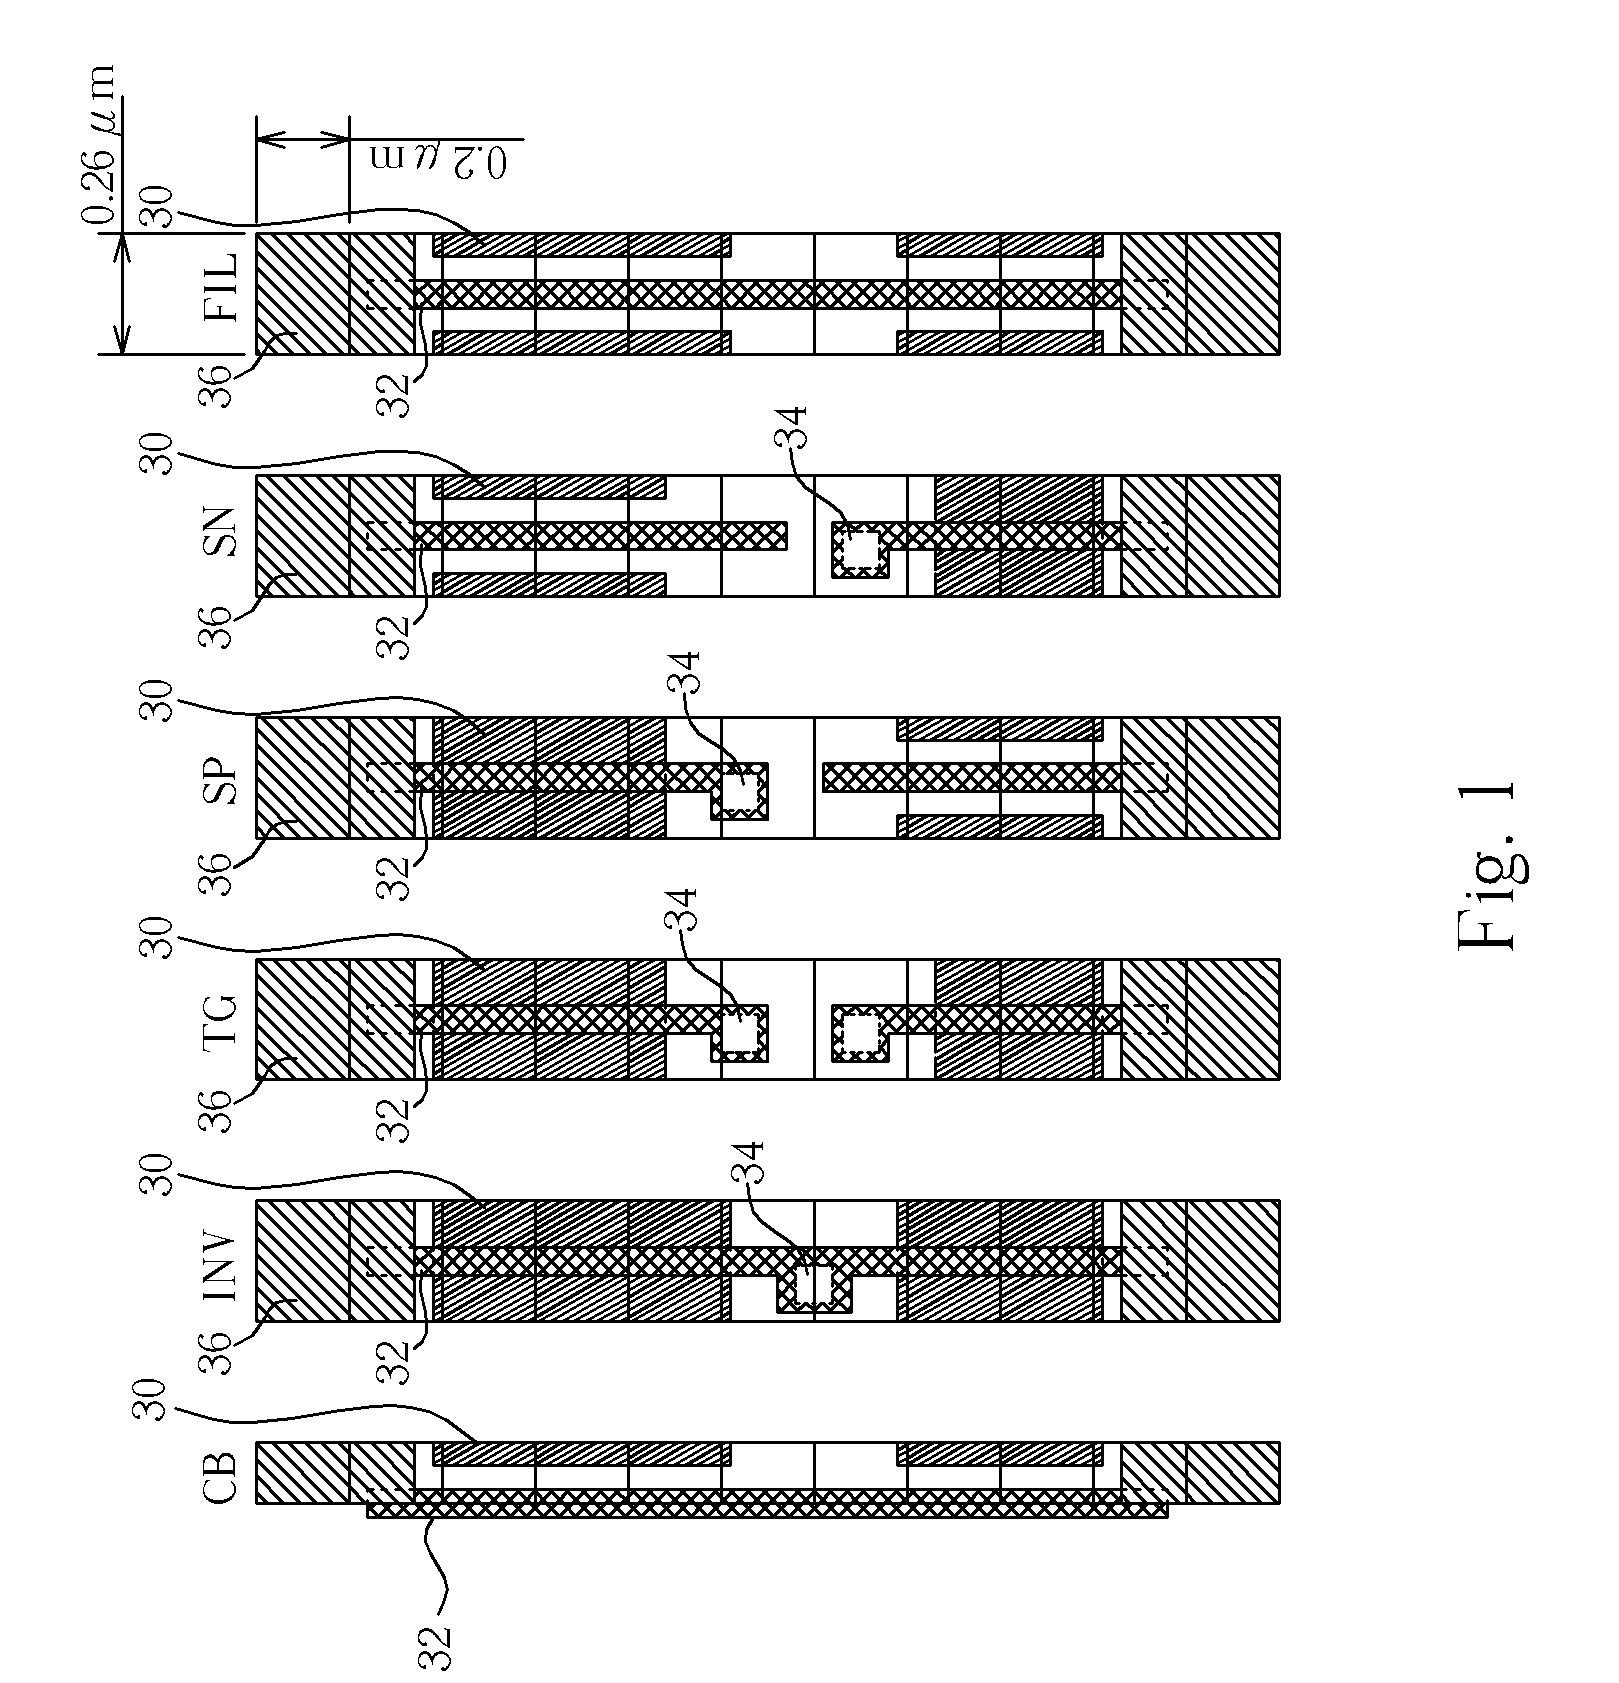 Method of generating a standard cell layout and transferring the standard cell layout to a substrate